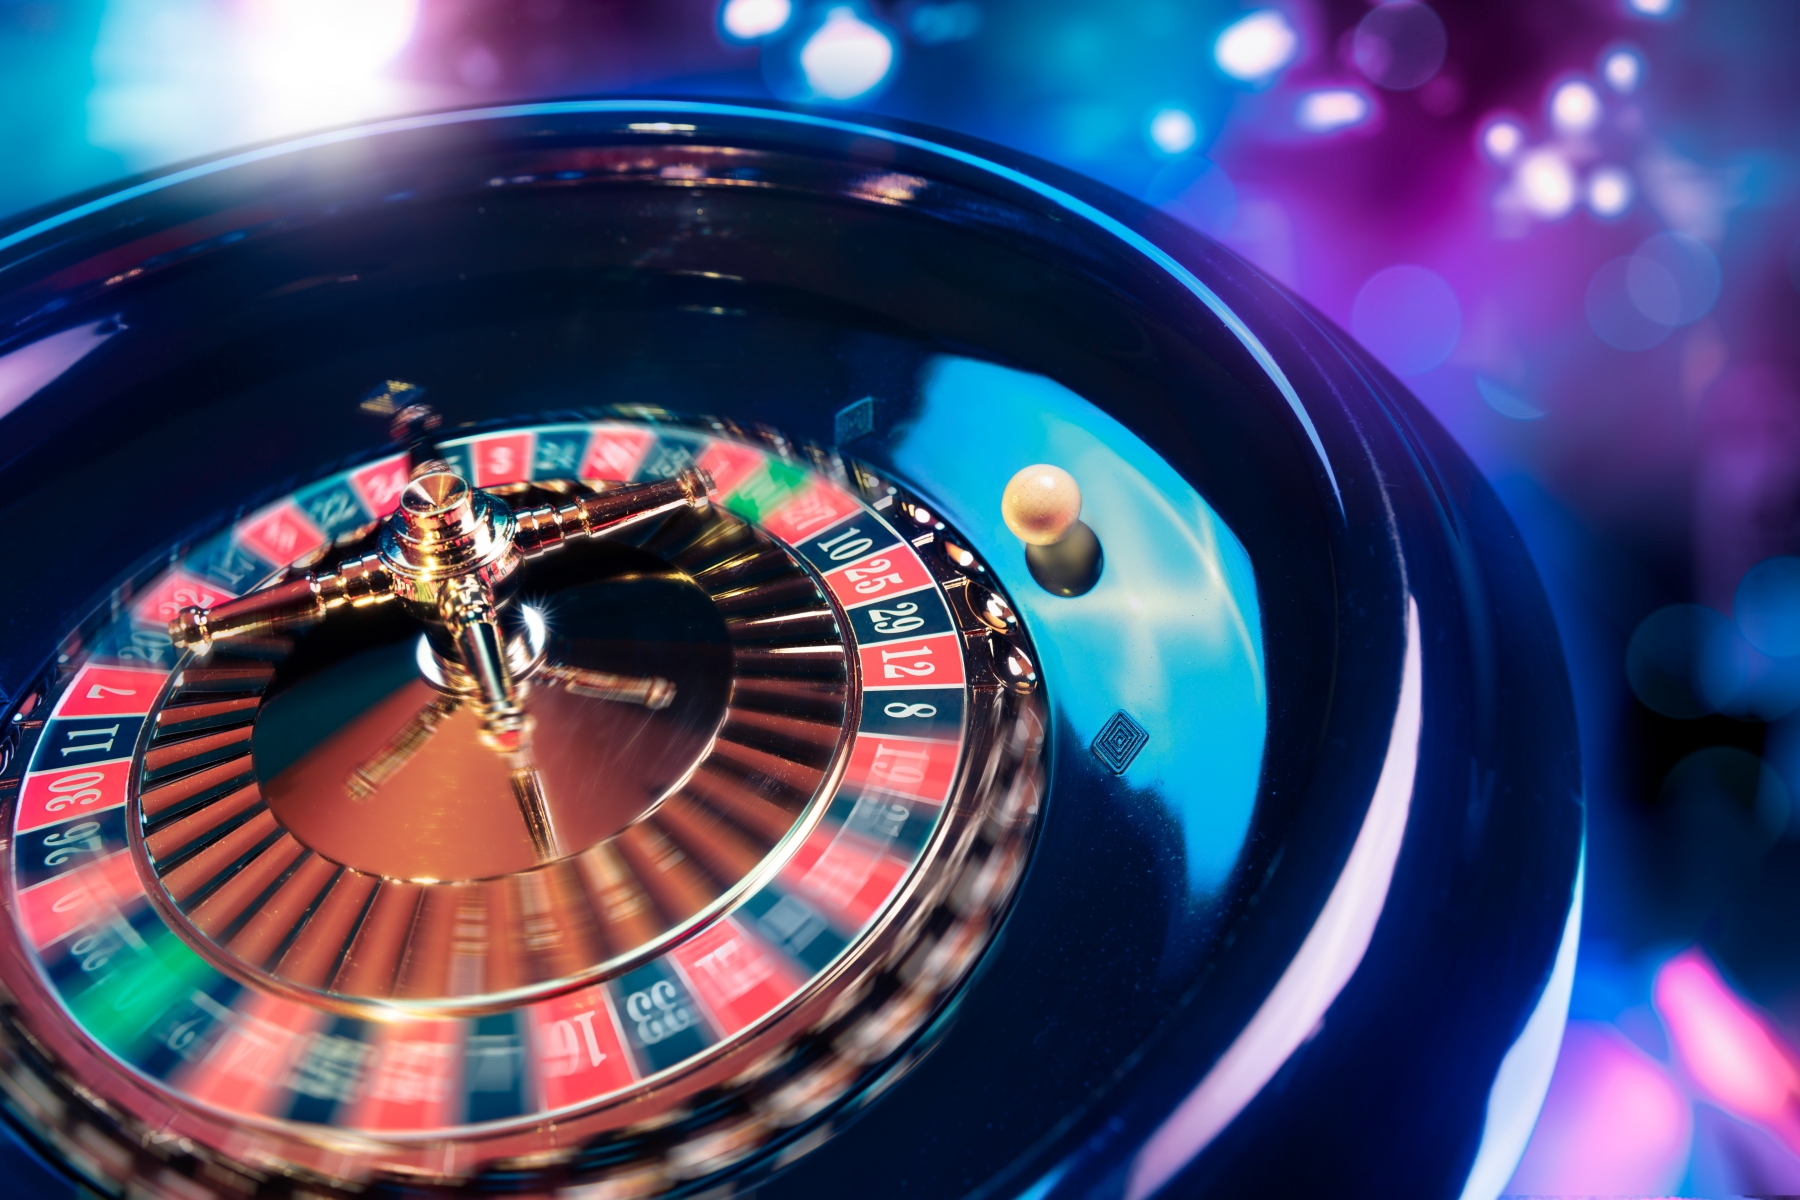 12823558-roulette-wheel-in-motion-with-a-bright-and-colorful-background